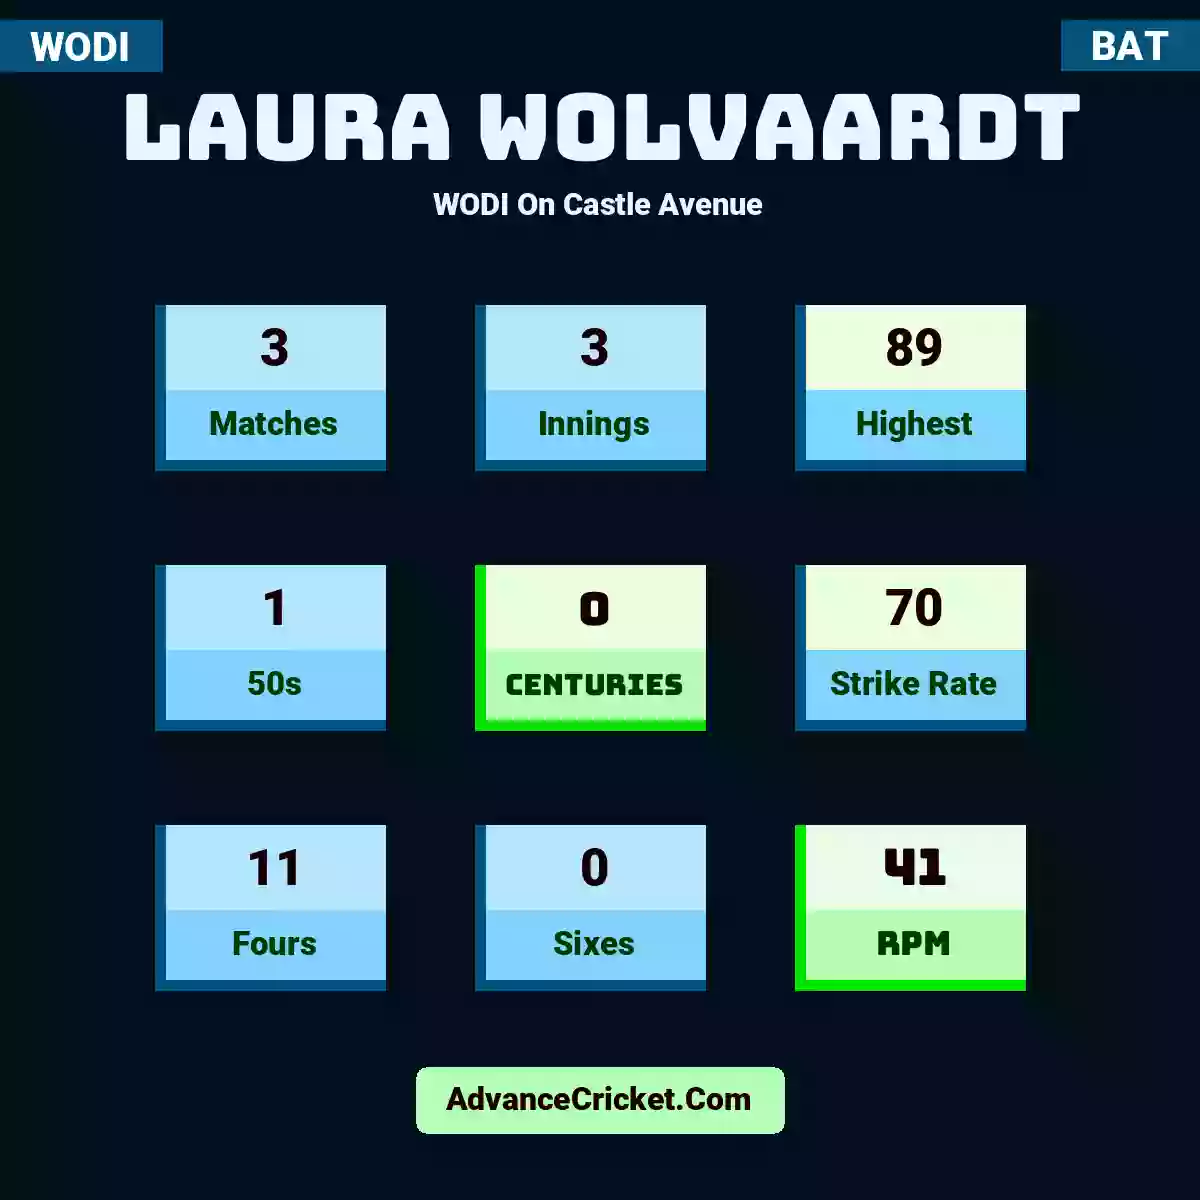 Laura Wolvaardt WODI  On Castle Avenue, Laura Wolvaardt played 3 matches, scored 89 runs as highest, 1 half-centuries, and 0 centuries, with a strike rate of 70. L.Wolvaardt hit 11 fours and 0 sixes, with an RPM of 41.